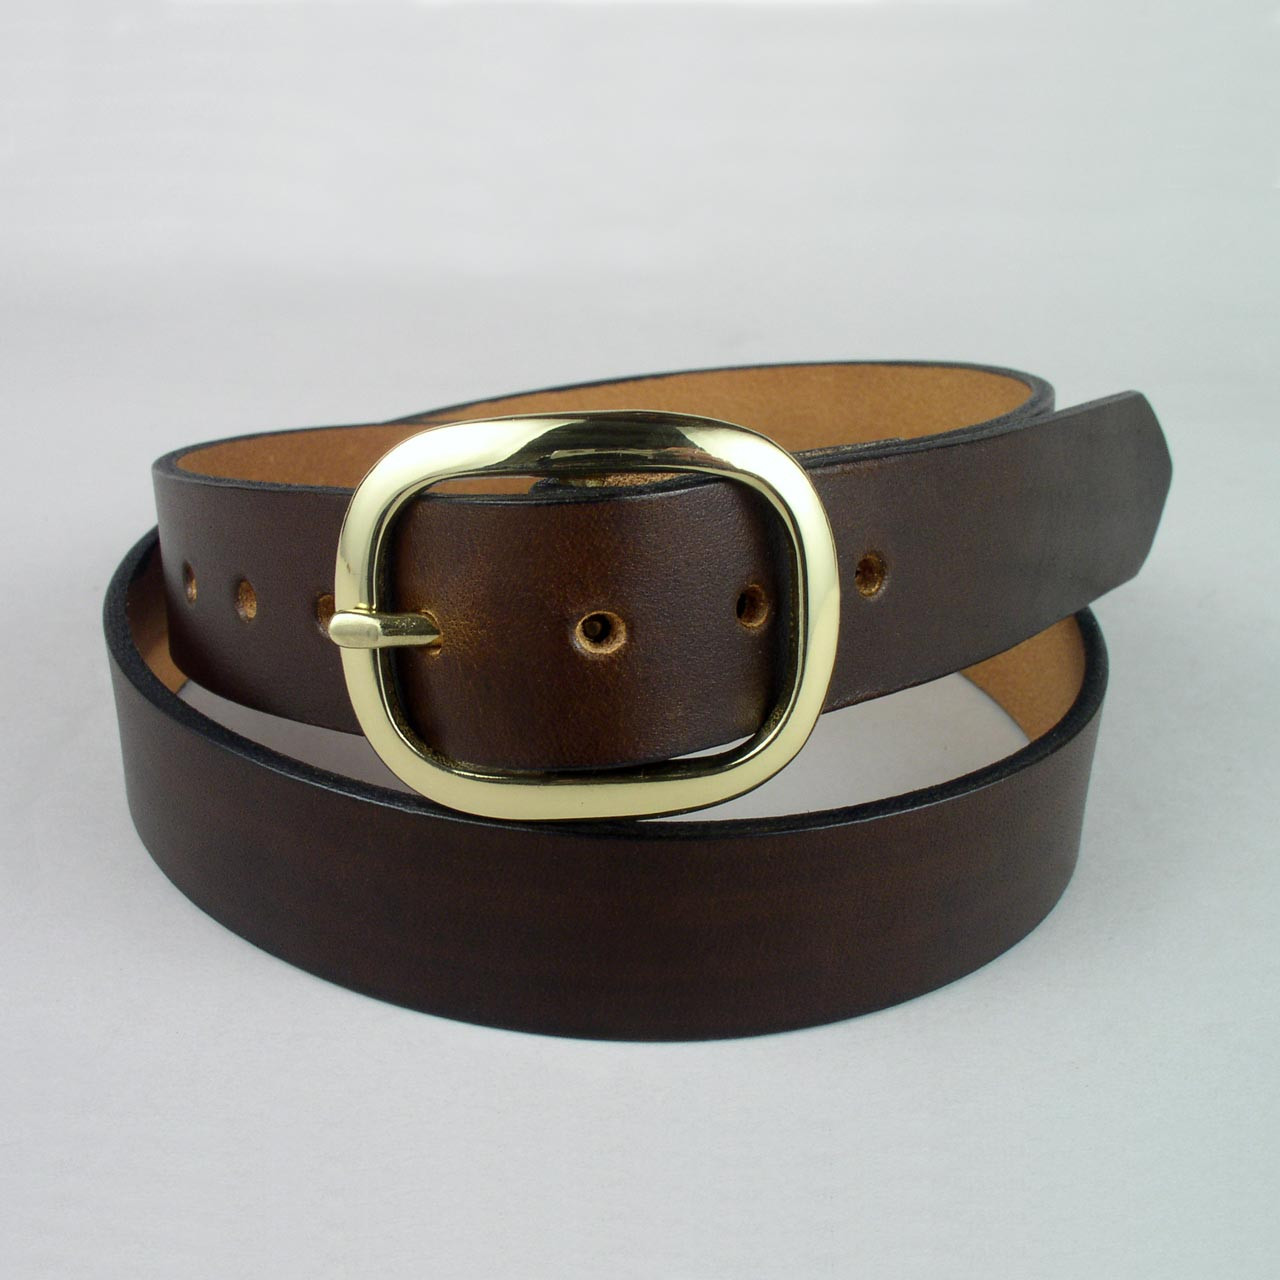 Solid Leather Belt